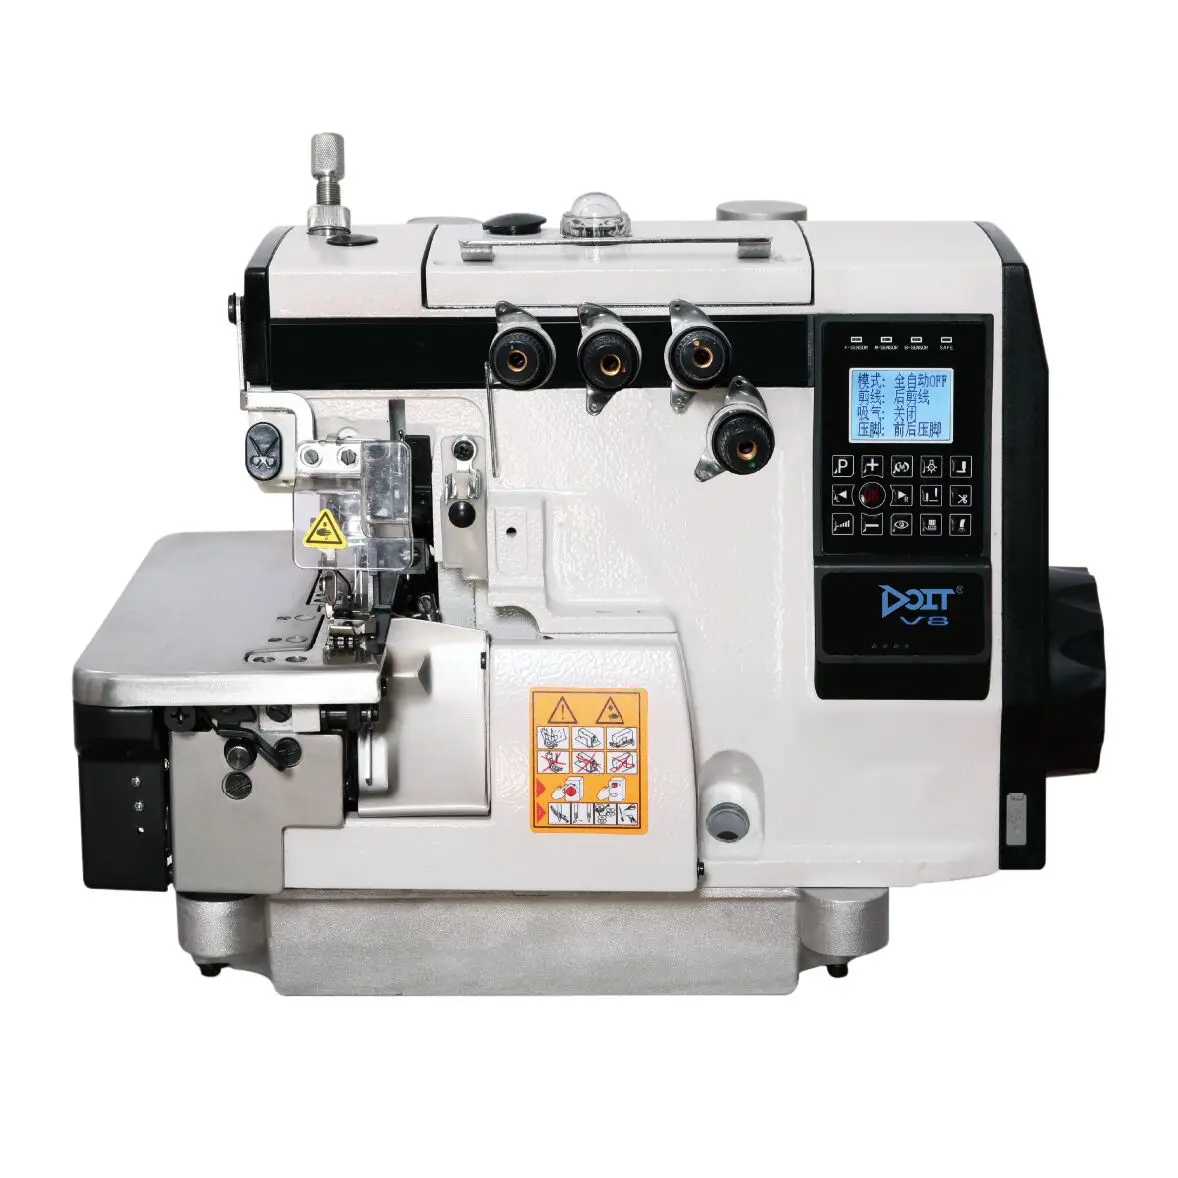 

DTV8-940-4AT DOIT Direct Drive Computerized 4 Thread Overlock Sewing Machine Industrial Overlock Sewing Machine